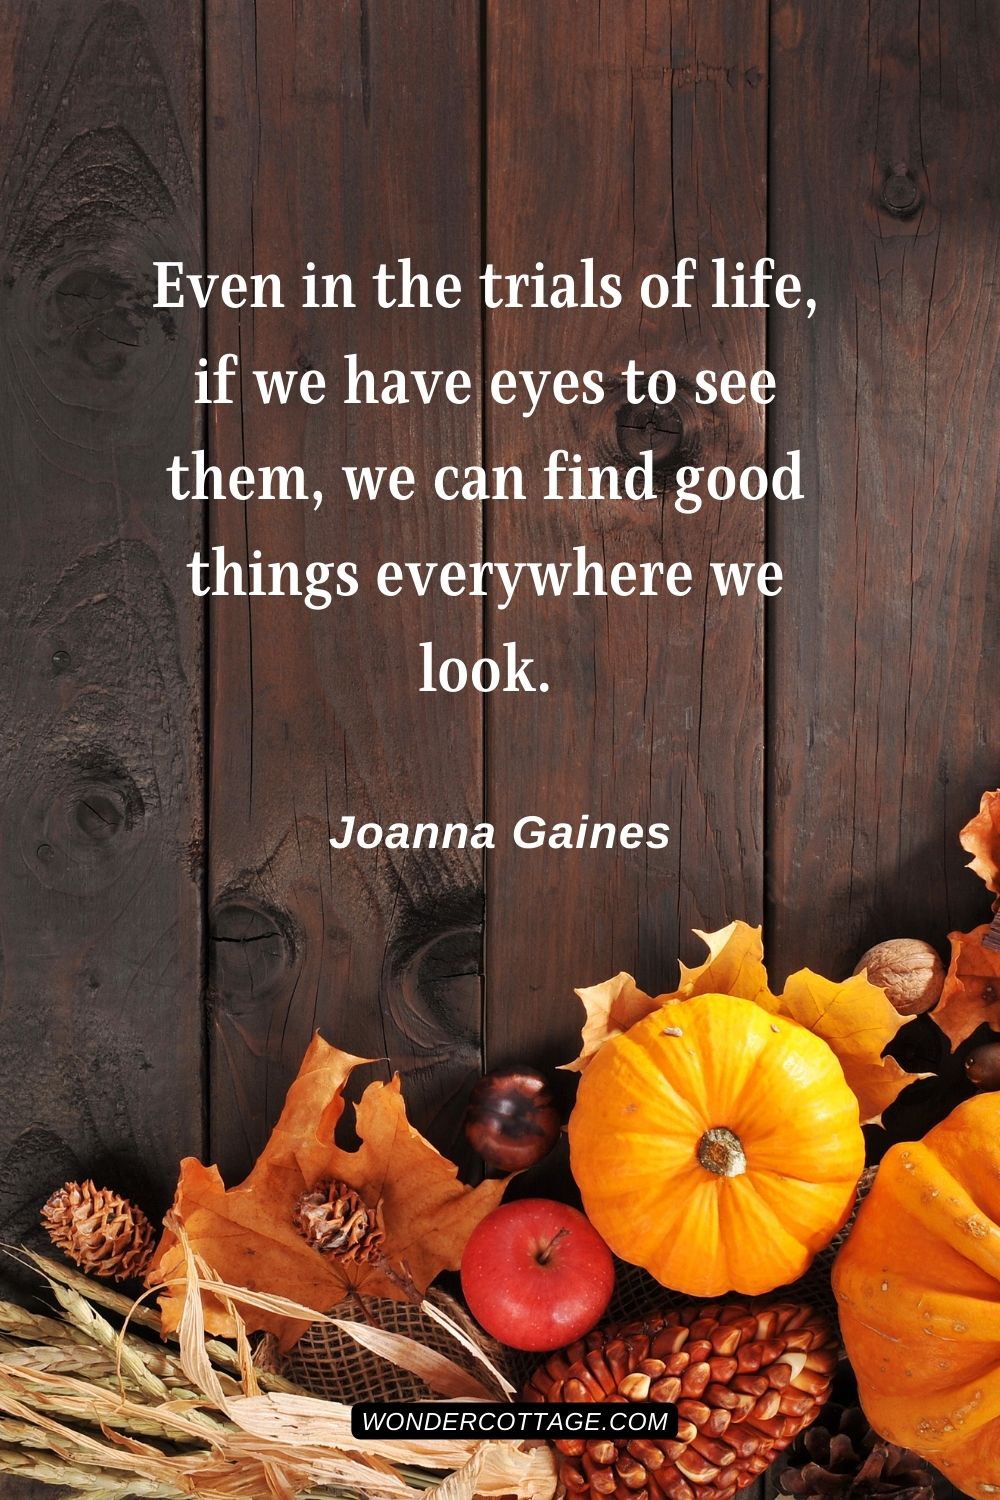 Even in the trials of life, if we have eyes to see them, we can find good things everywhere we look. Joanna Gaines